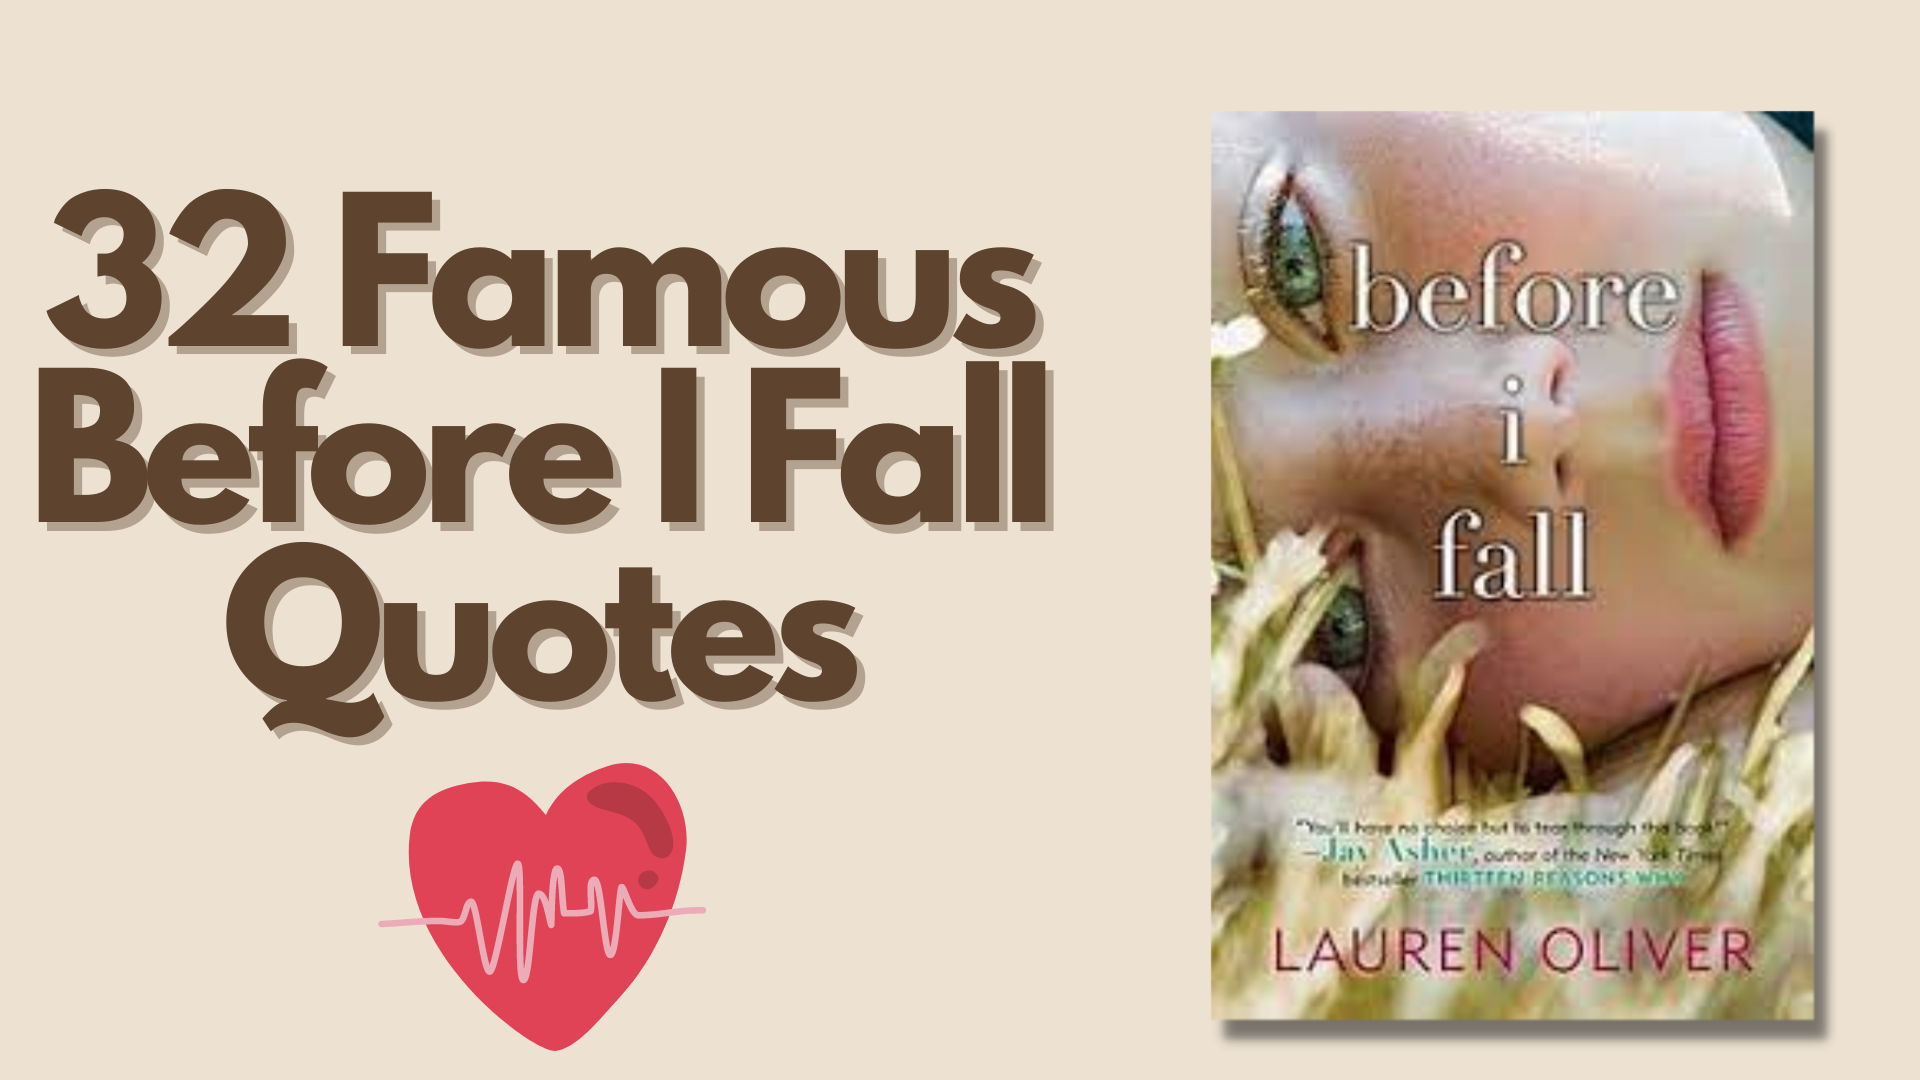 32 Famous Before I Fall Quotes - Quote Collectors Club